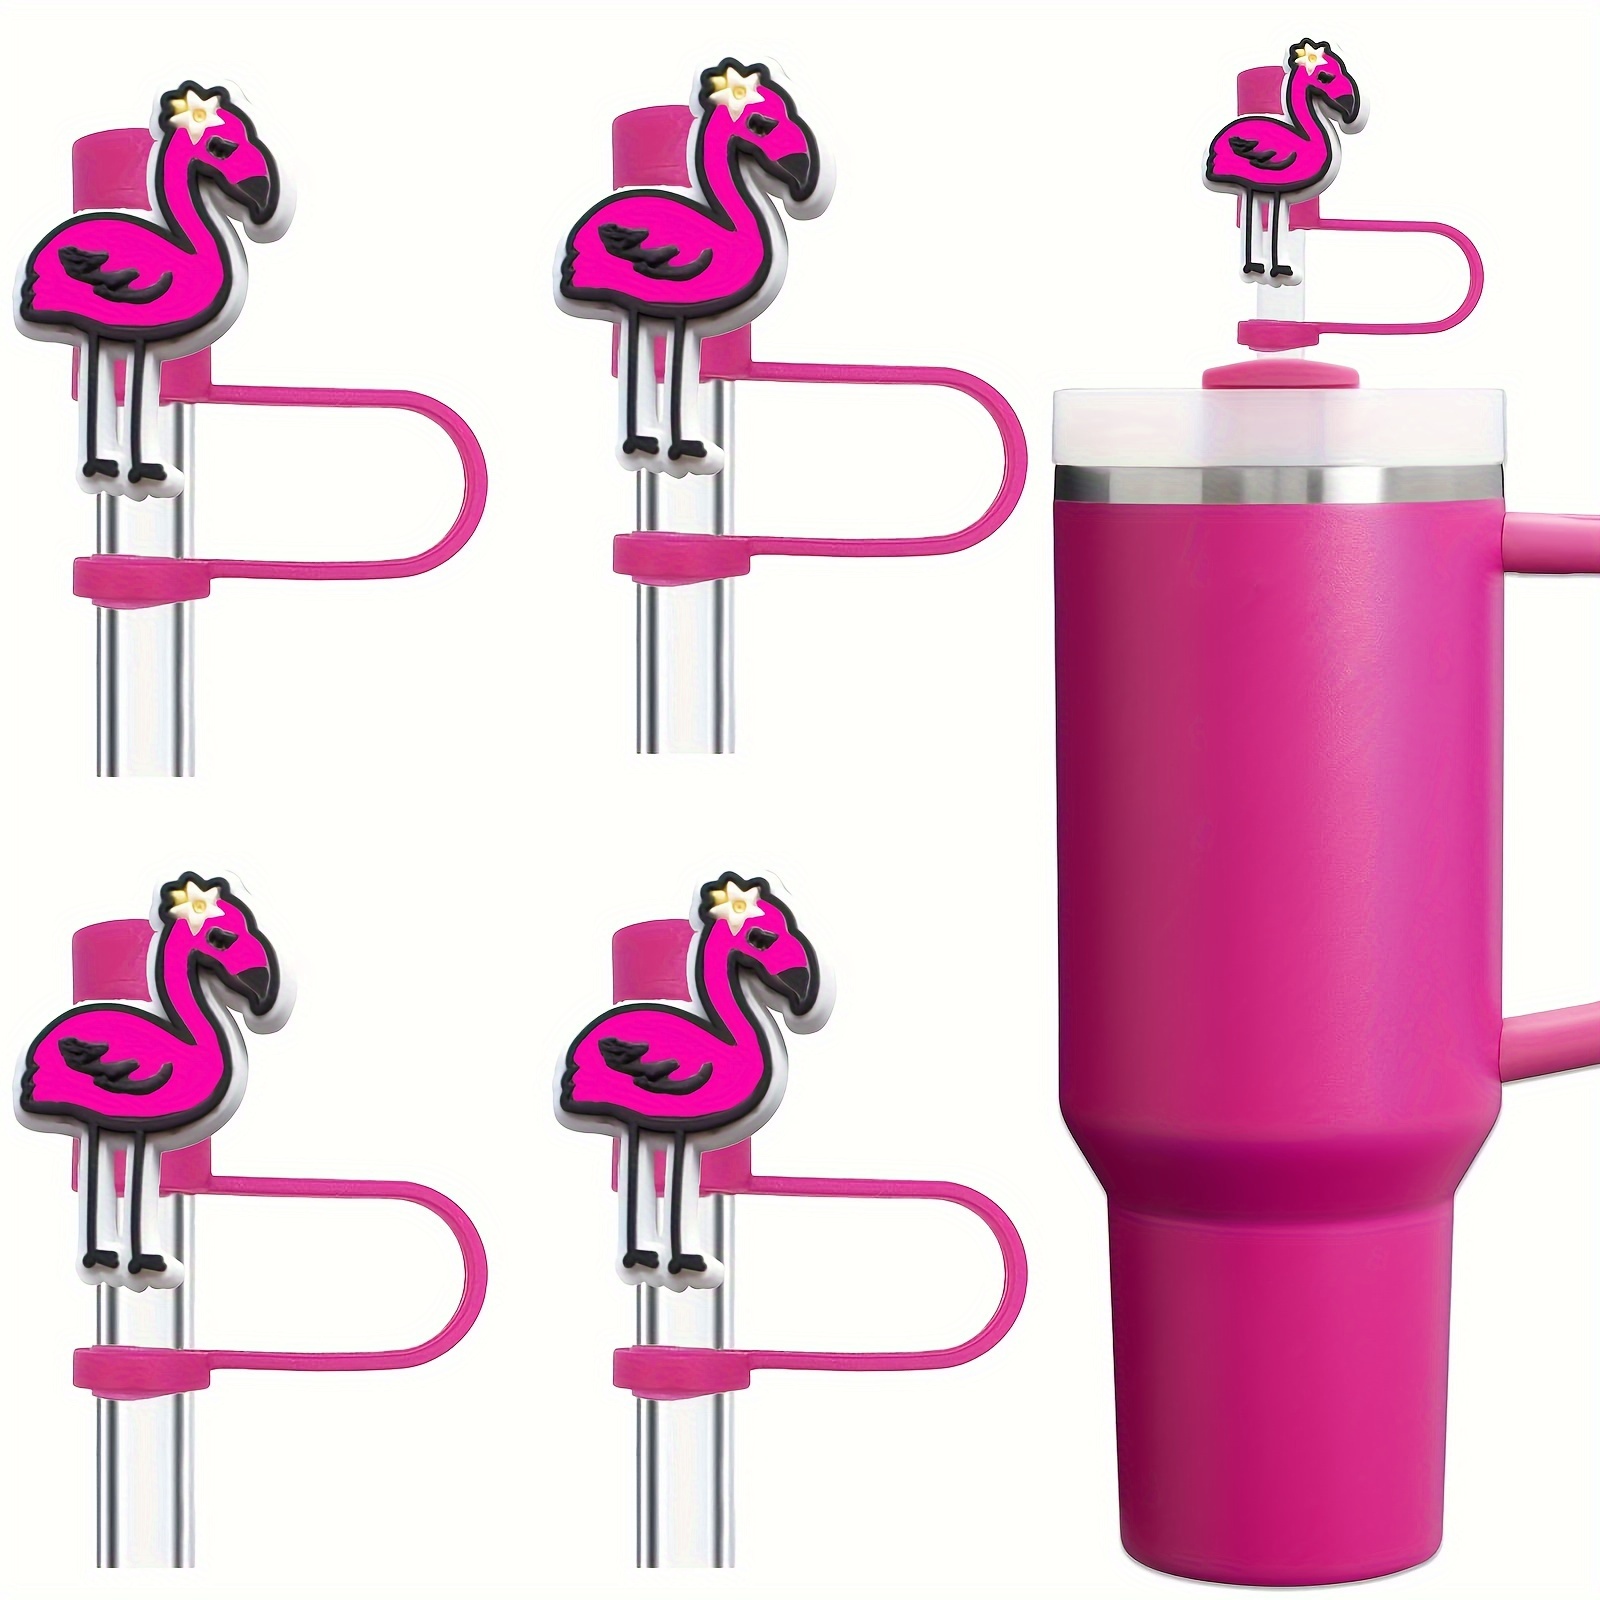 

4-pack Flamingo Silicone Straw Covers For Tumblers, Reusable Straw Toppers With Handle Attachment, Dustproof Straw Protectors, Compatible With 30/40oz Cups - 10mm Accessory